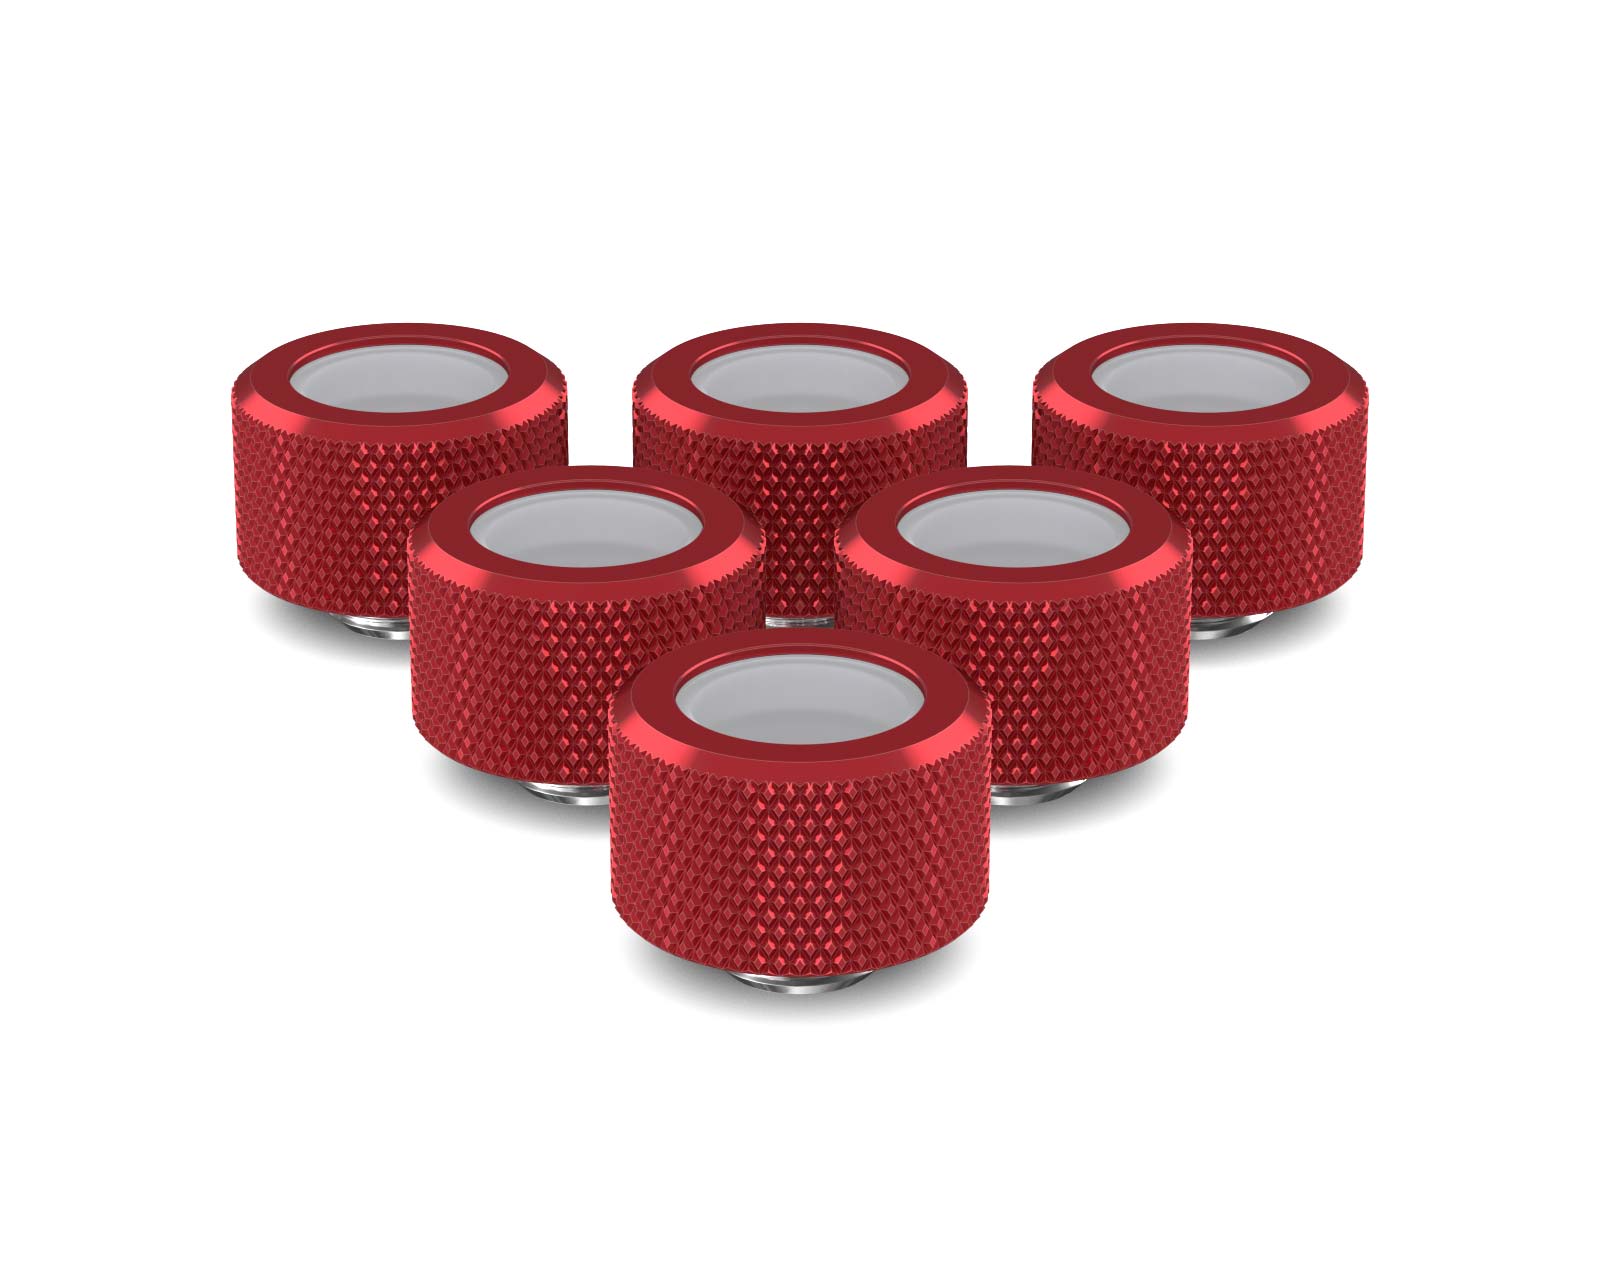 PrimoChill 16mm OD Rigid SX Fitting - 6 Pack - PrimoChill - KEEPING IT COOL Candy Red